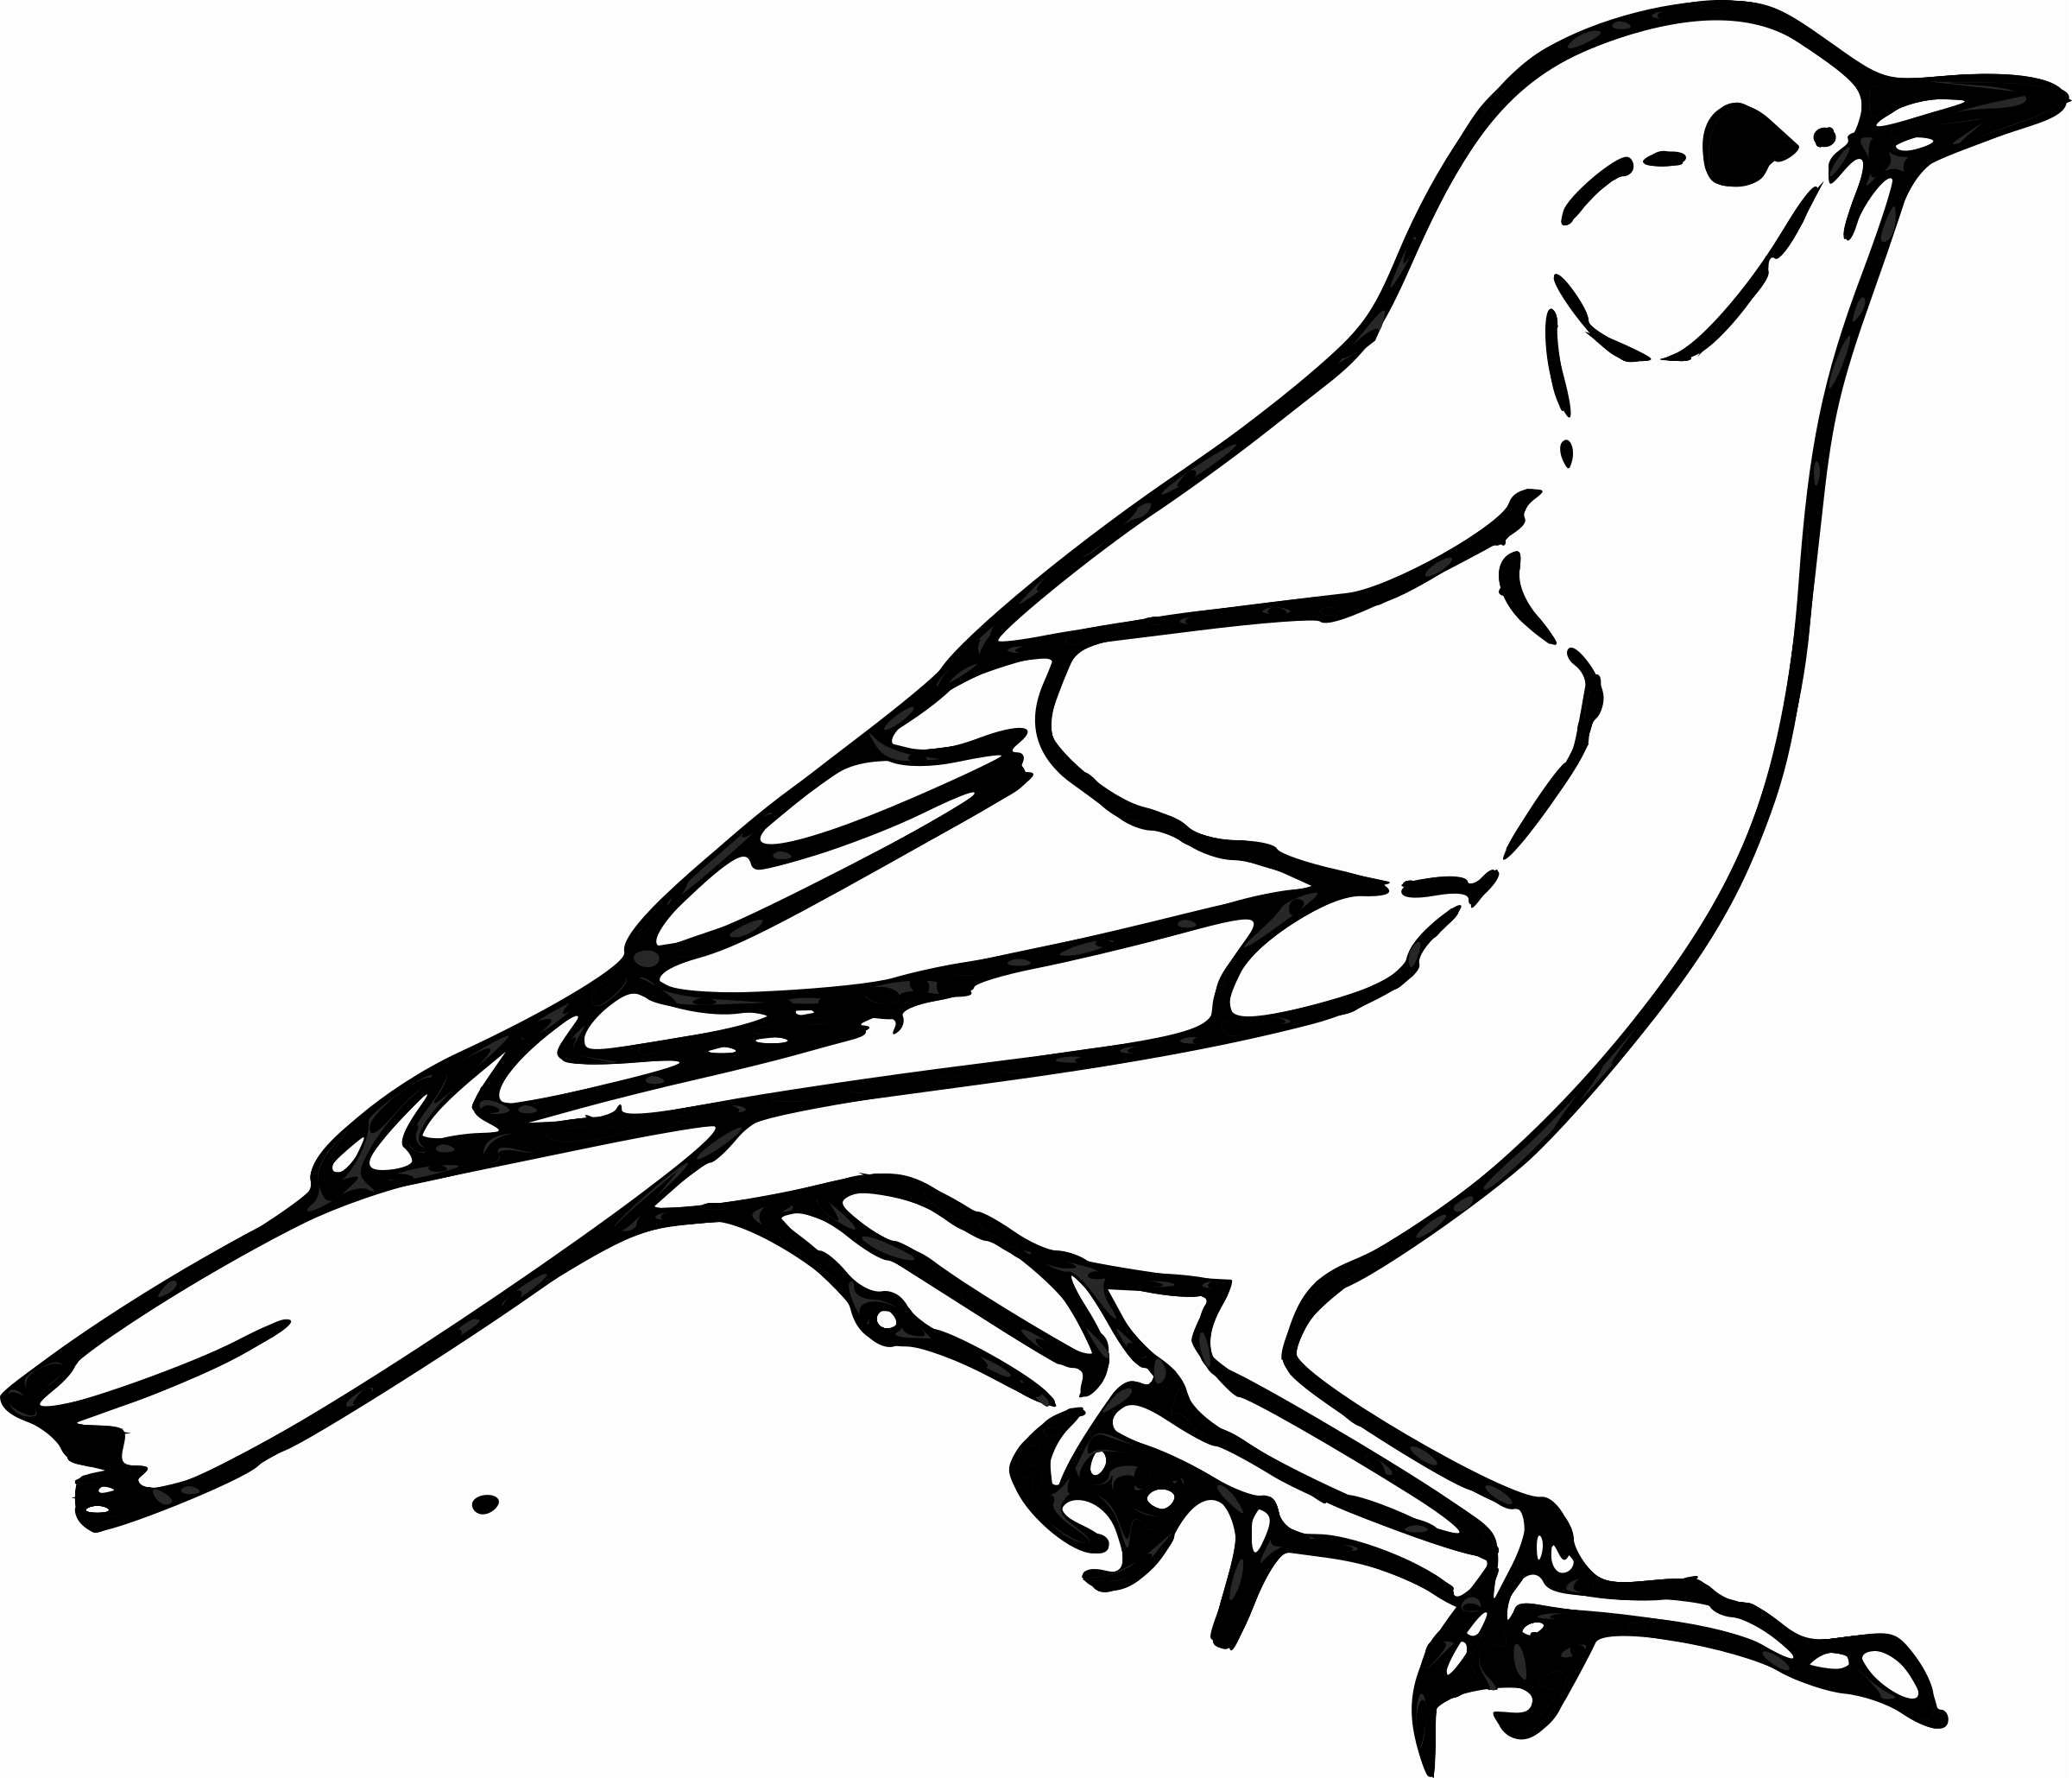 Free Sparrow Clipart Black And White, Download Free Sparrow Clipart